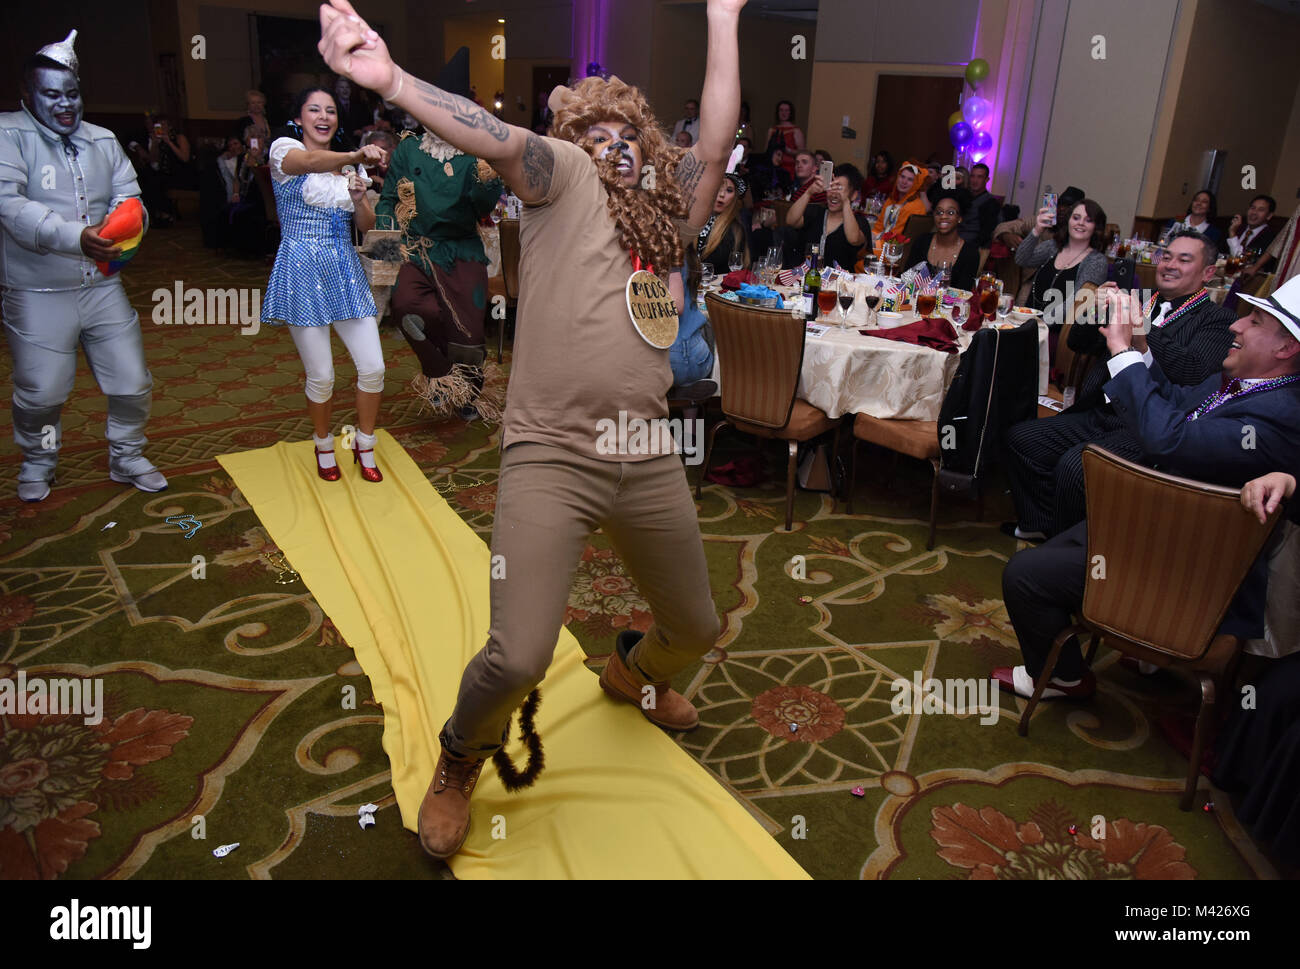 Senior Airman Rashawn Thompson, 81st Medical Operations Squadron mental health technician, dressed as the Cowardly Lion from The Wizard of Oz, dances down the aisle during a Mardi Gras float contest at the 30th Annual Krewe of Medics Mardi Gras Ball at the Bay Breeze Event Center Feb. 3, 2018, on Keesler Air Force Base, Mississippi. The Krewe of Medics hosts a yearly ball to give Keesler Medical Center personnel a taste of the Gulf Coast and an opportunity to experience a traditional Mardi Gras. The theme for this year's ball was Read It-Be It. The 81st MDOS won first place in the float contes Stock Photo